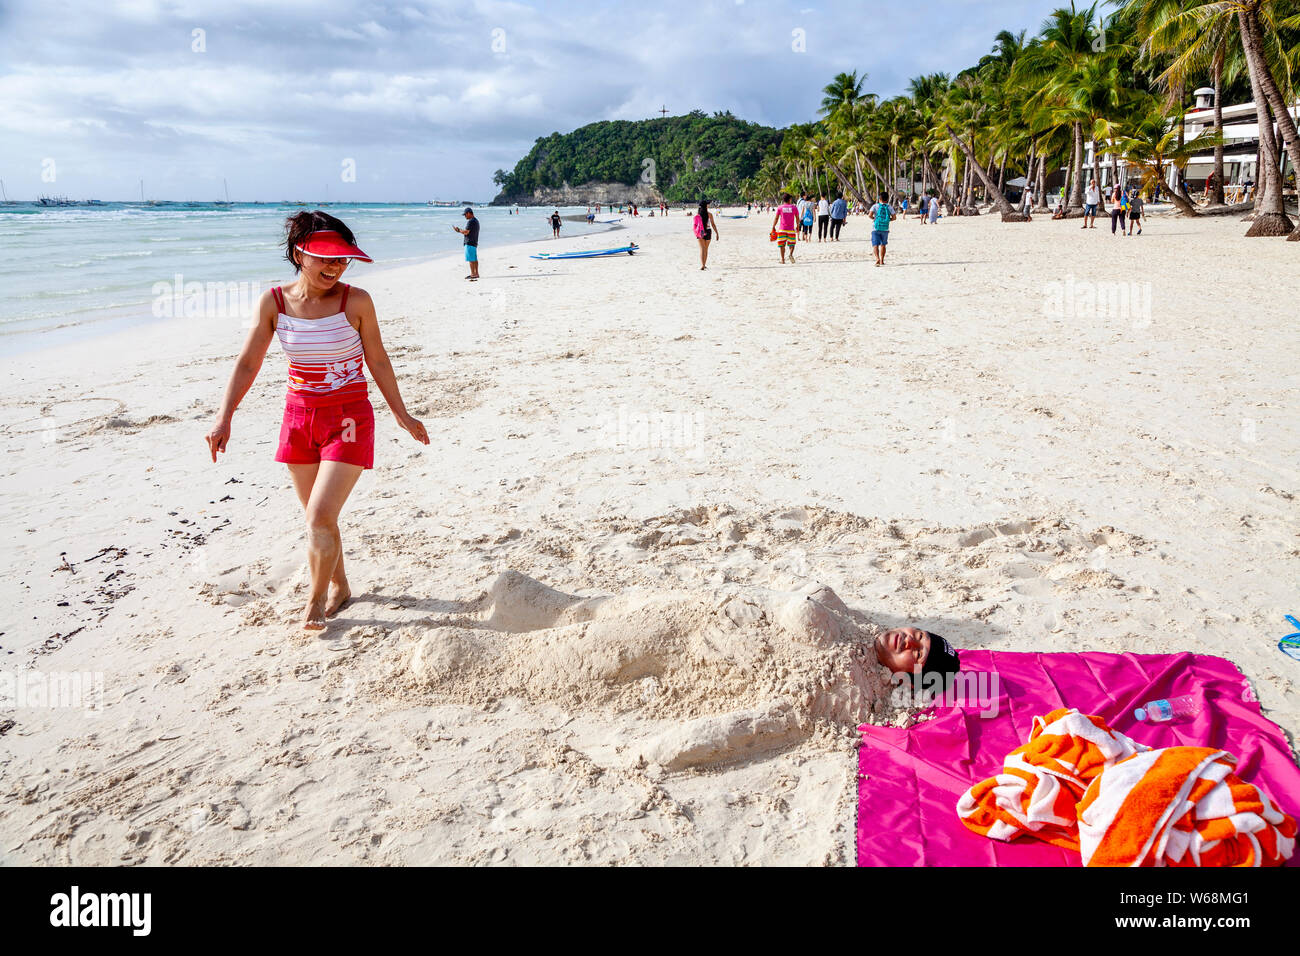 Tourists Being Covered In Sand, White Beach, Boracay, Aklan Province, The Philippines. Stock Photo